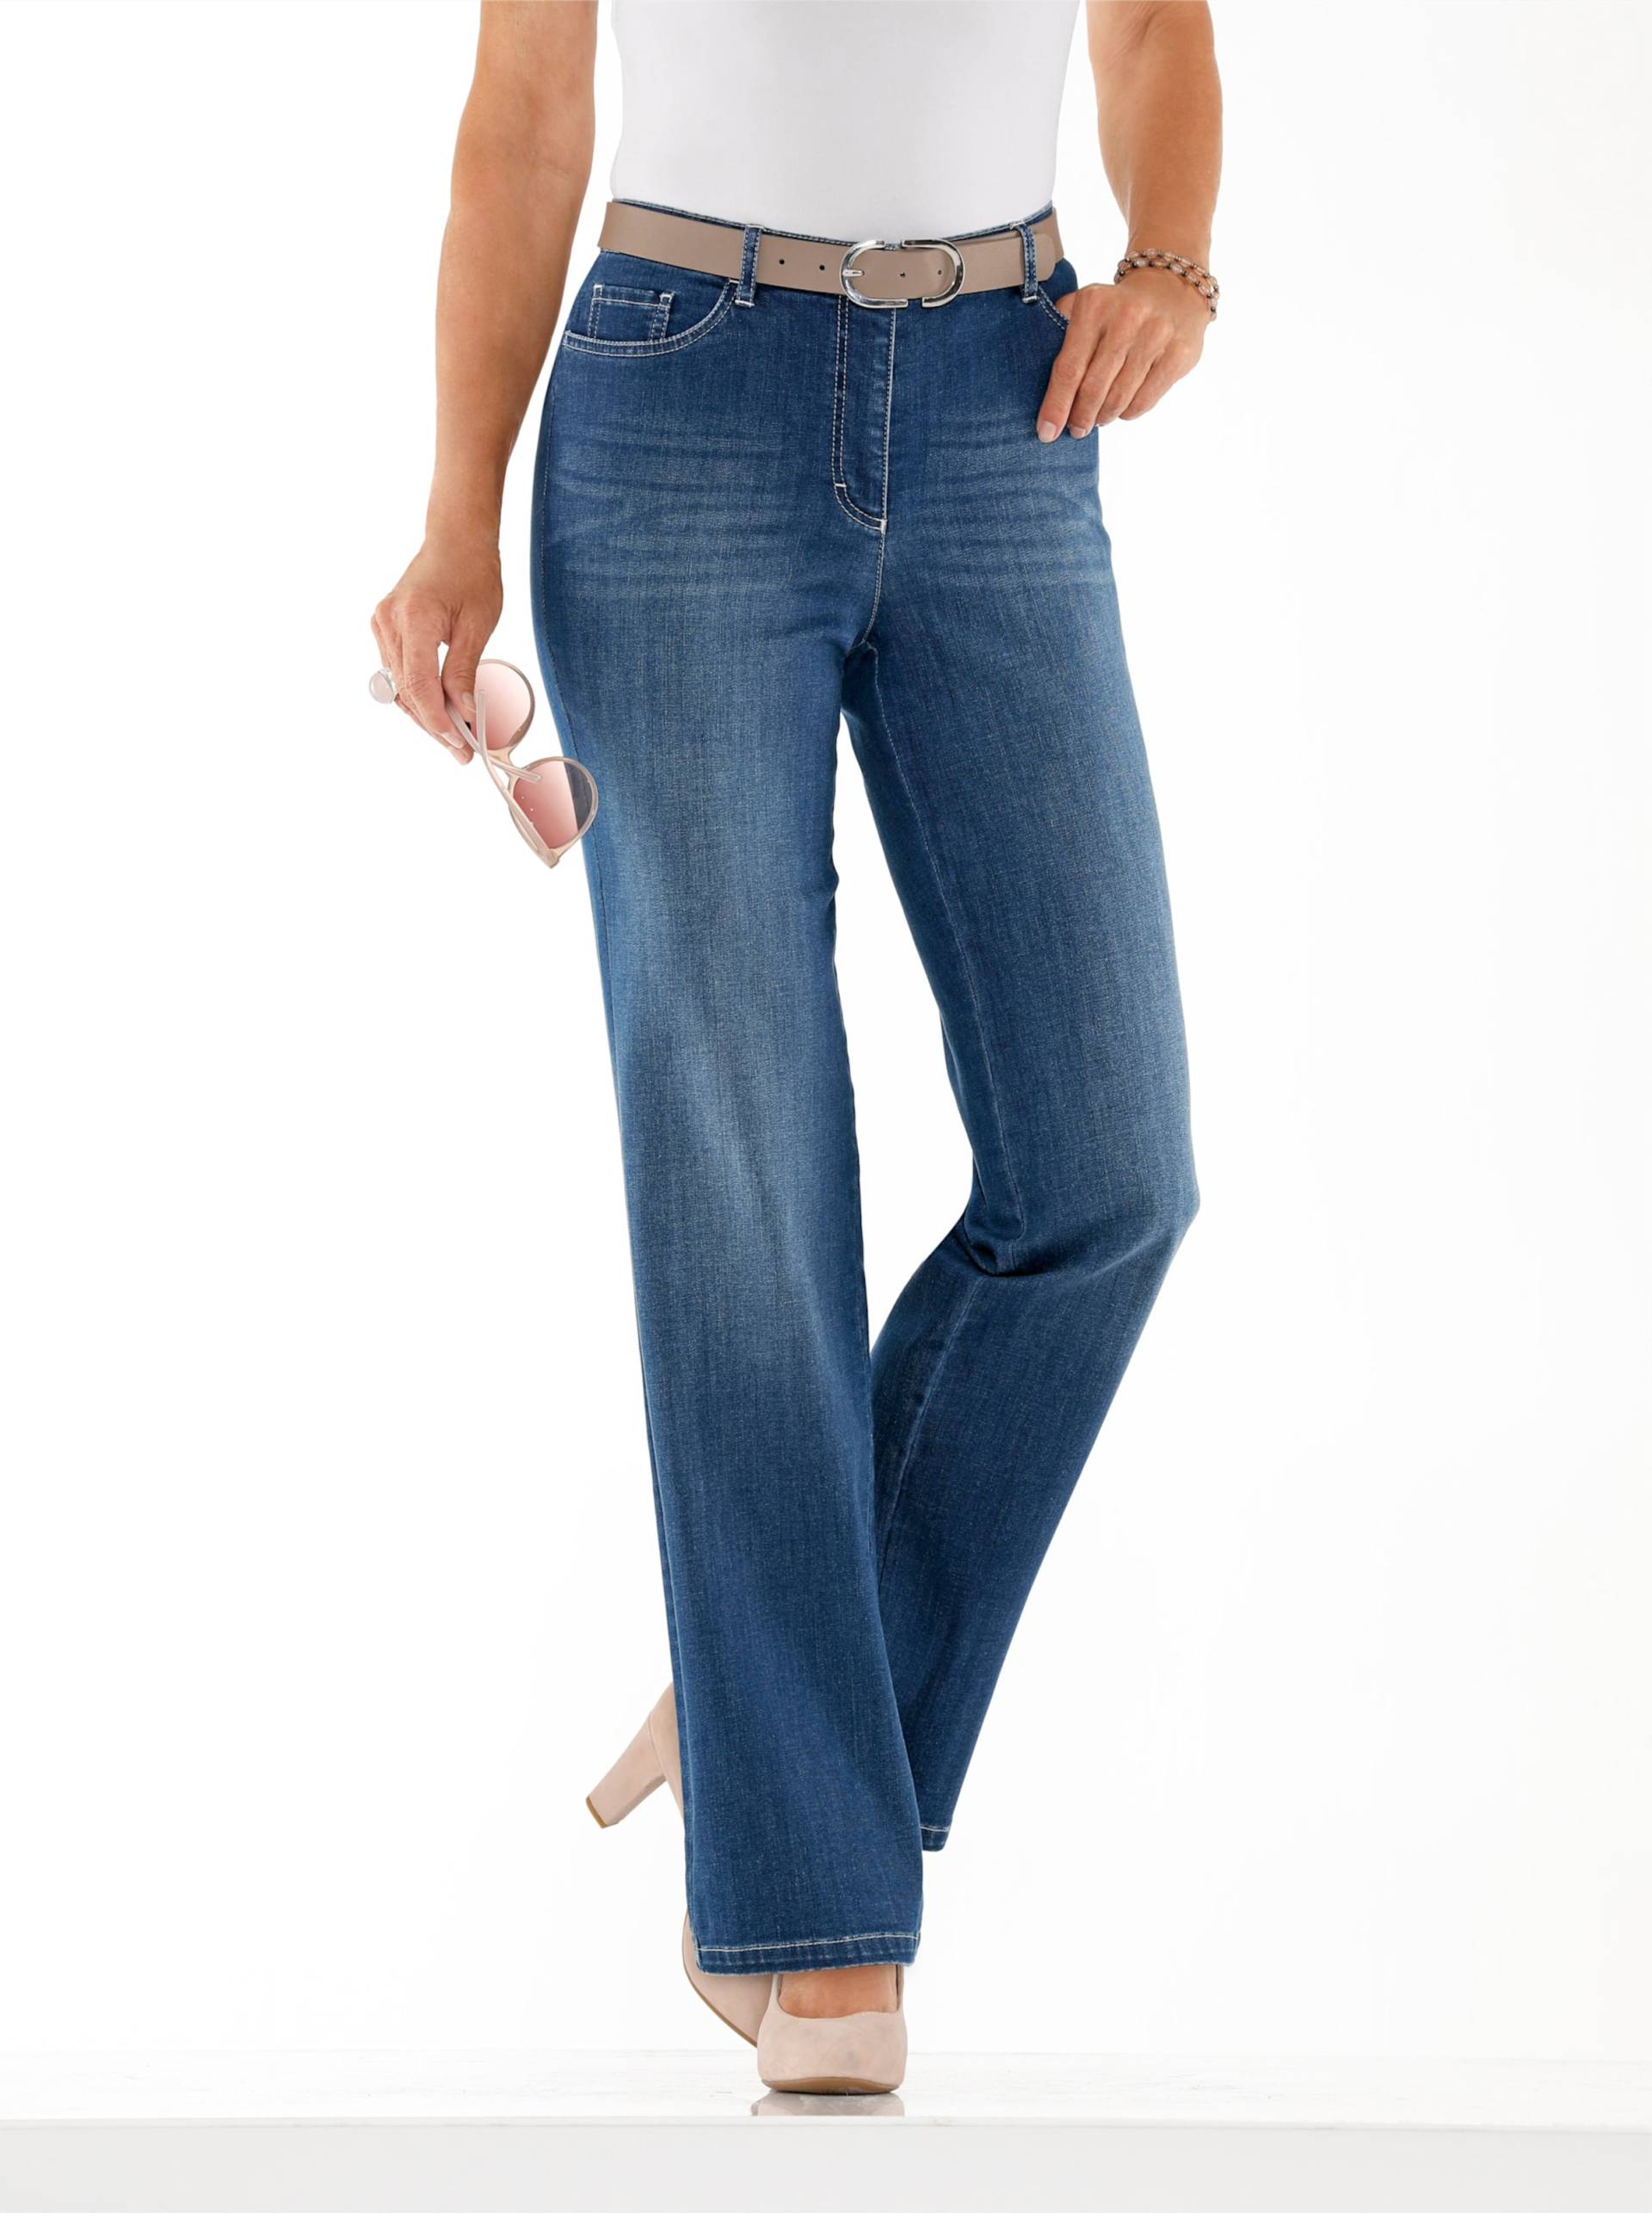 Jeans in blue-stone-washed von Cosma